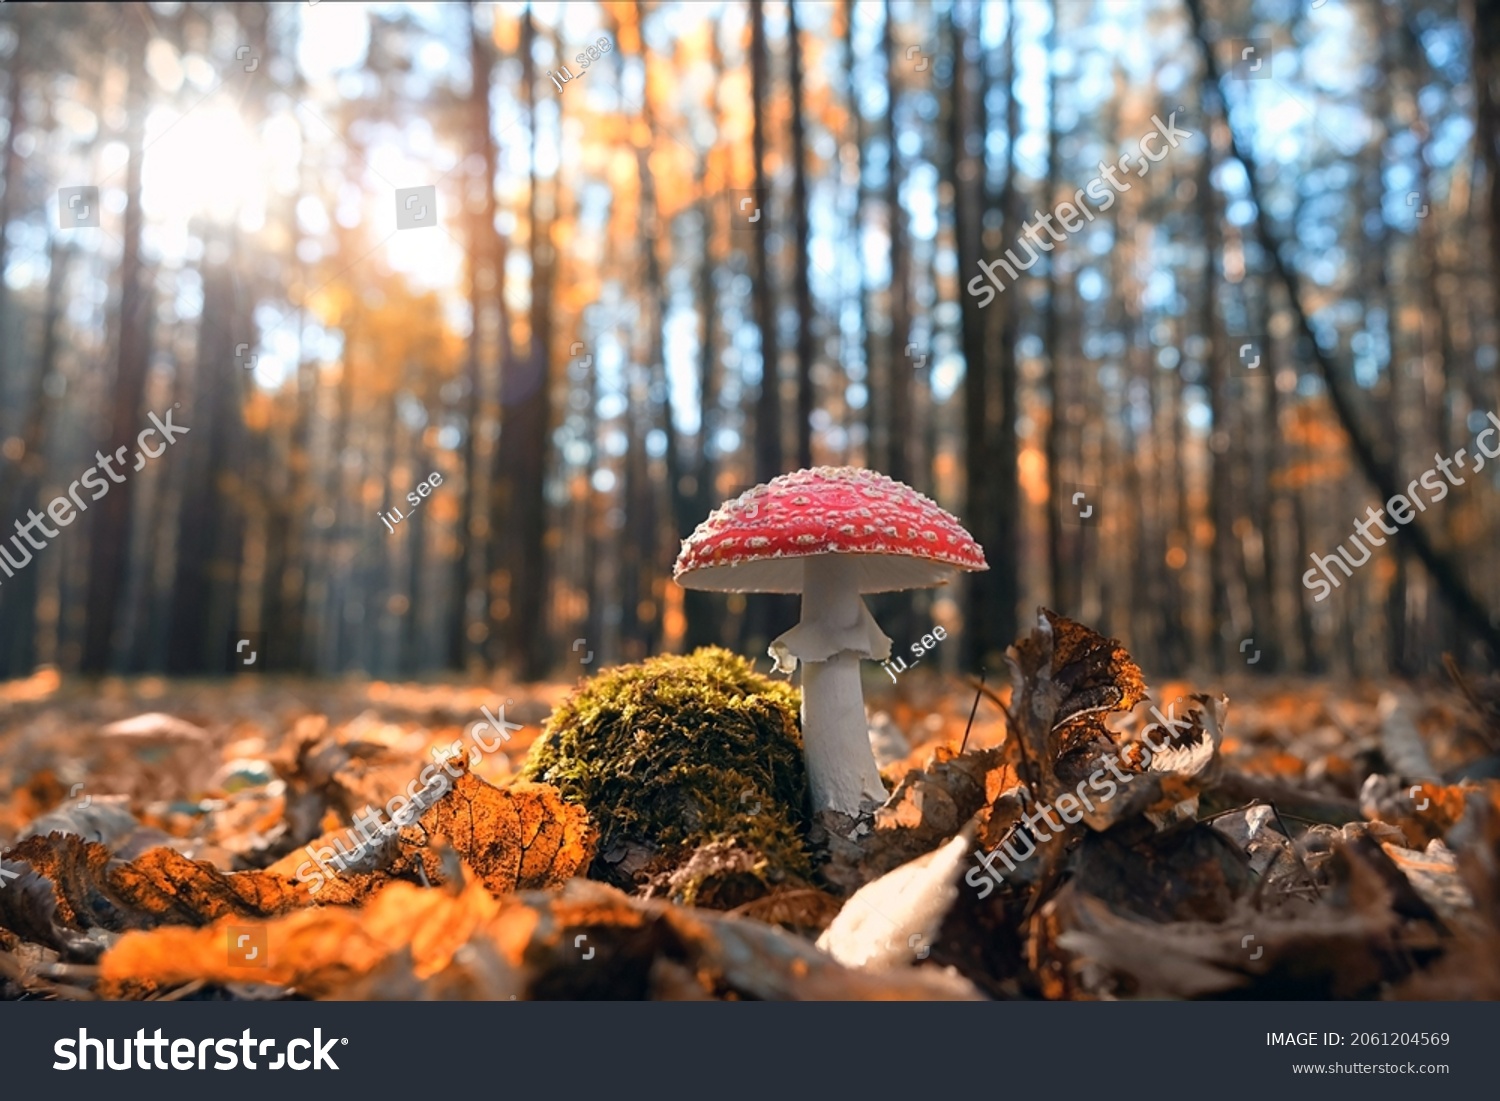 autumn season. amanita muscaria mushroom in autumn forest, natural bright sunny background. harvest fungi concept. Fly agaric, wild poisonous red mushroom  in yellow-orange fallen leaves. #2061204569